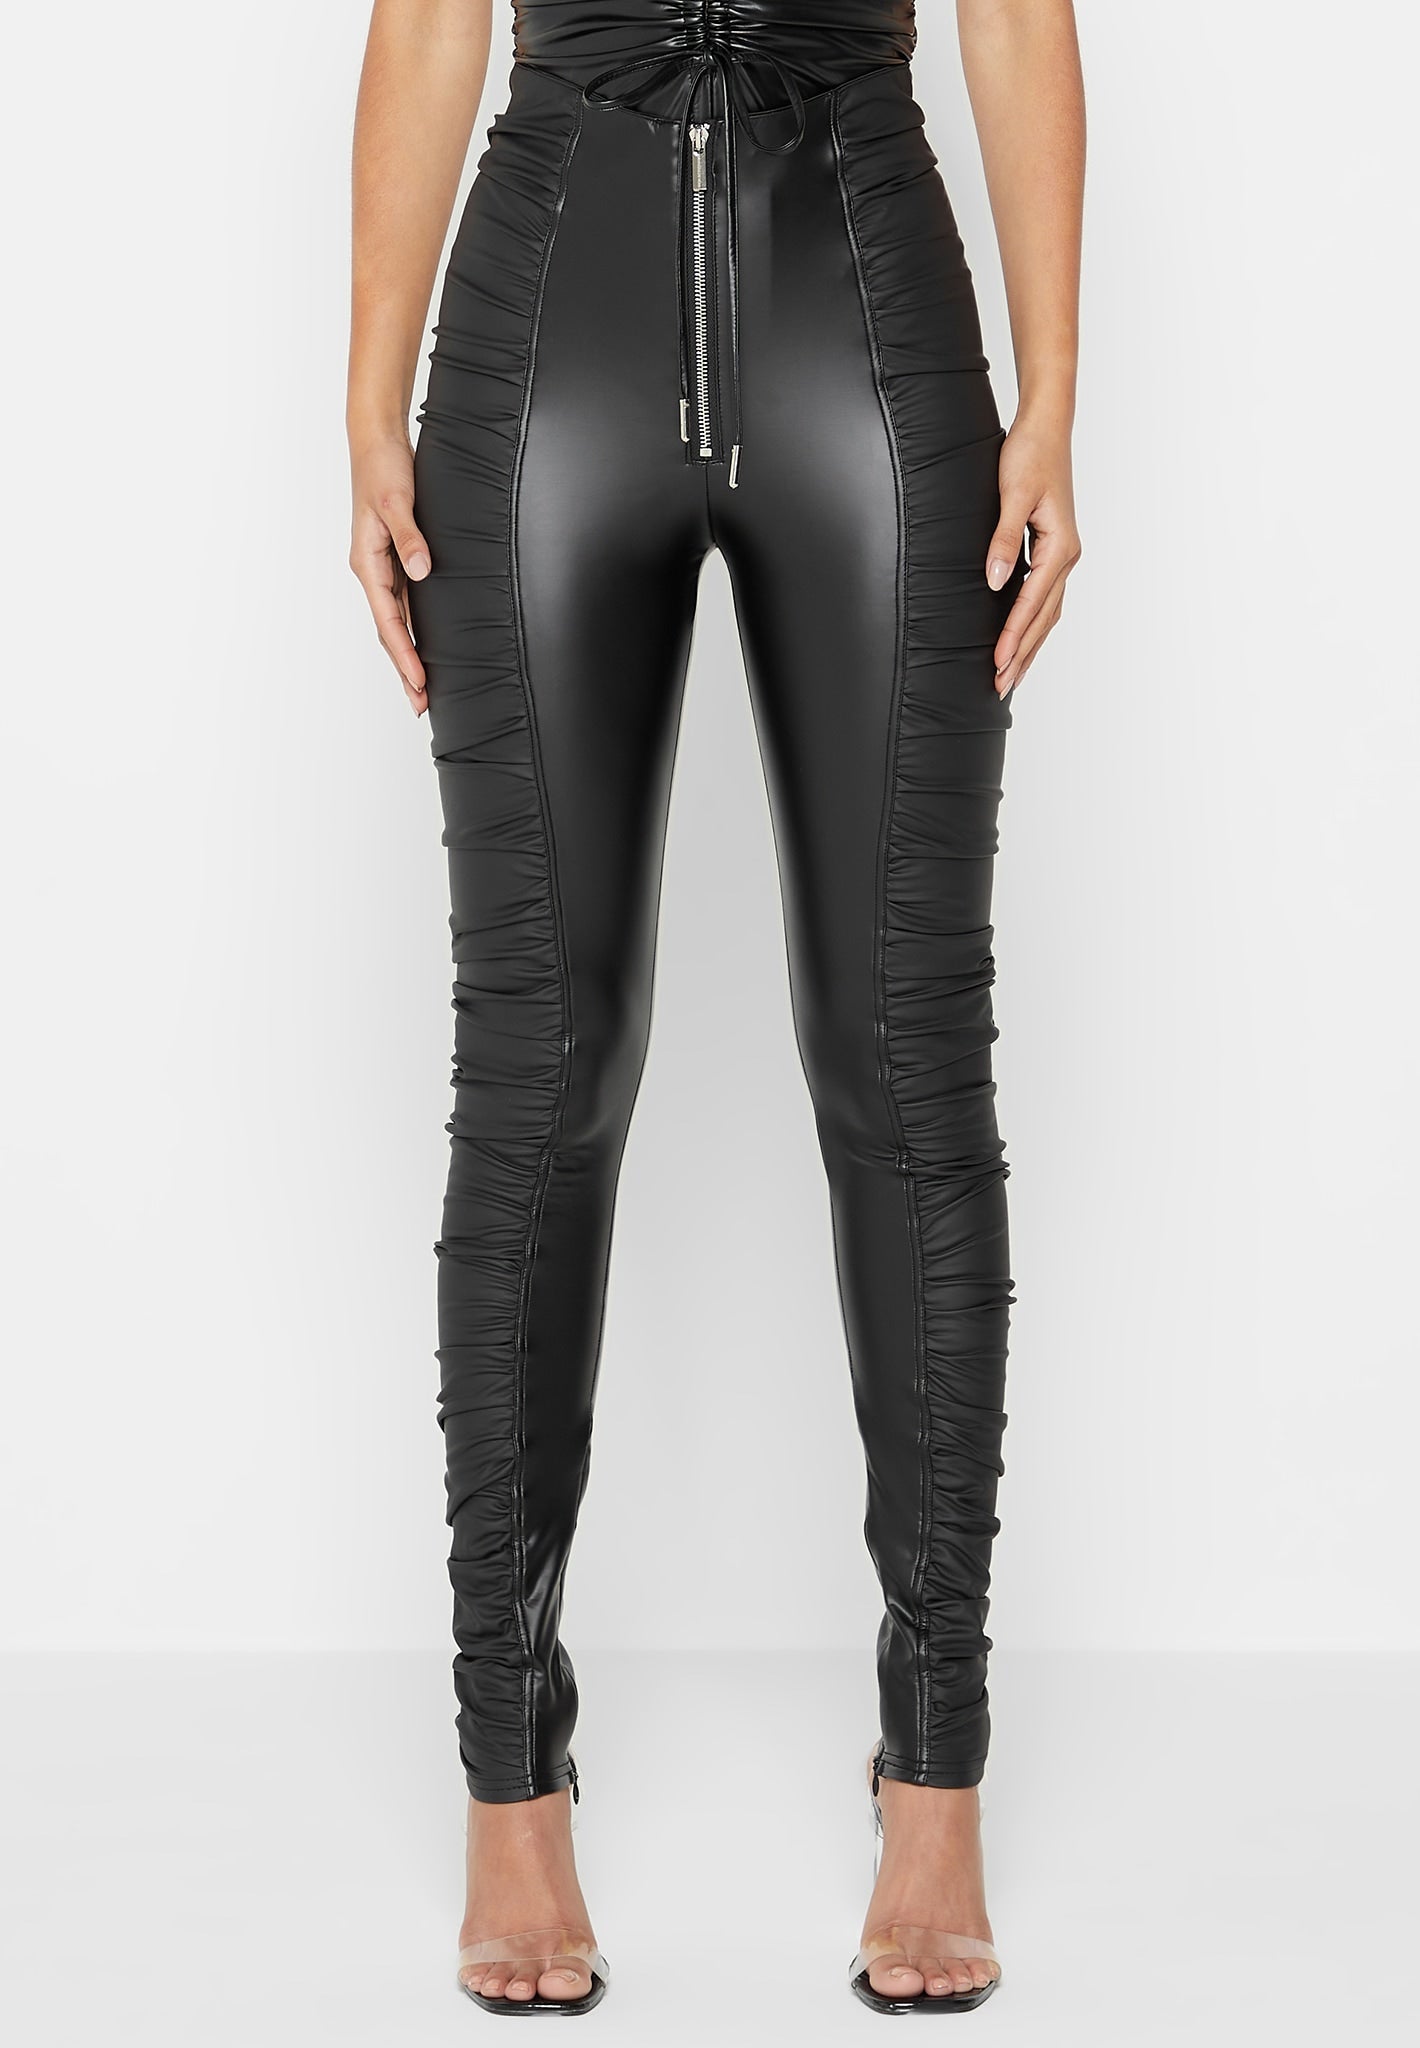 Missguided Faux Leather Lace Up Side Leggings Black